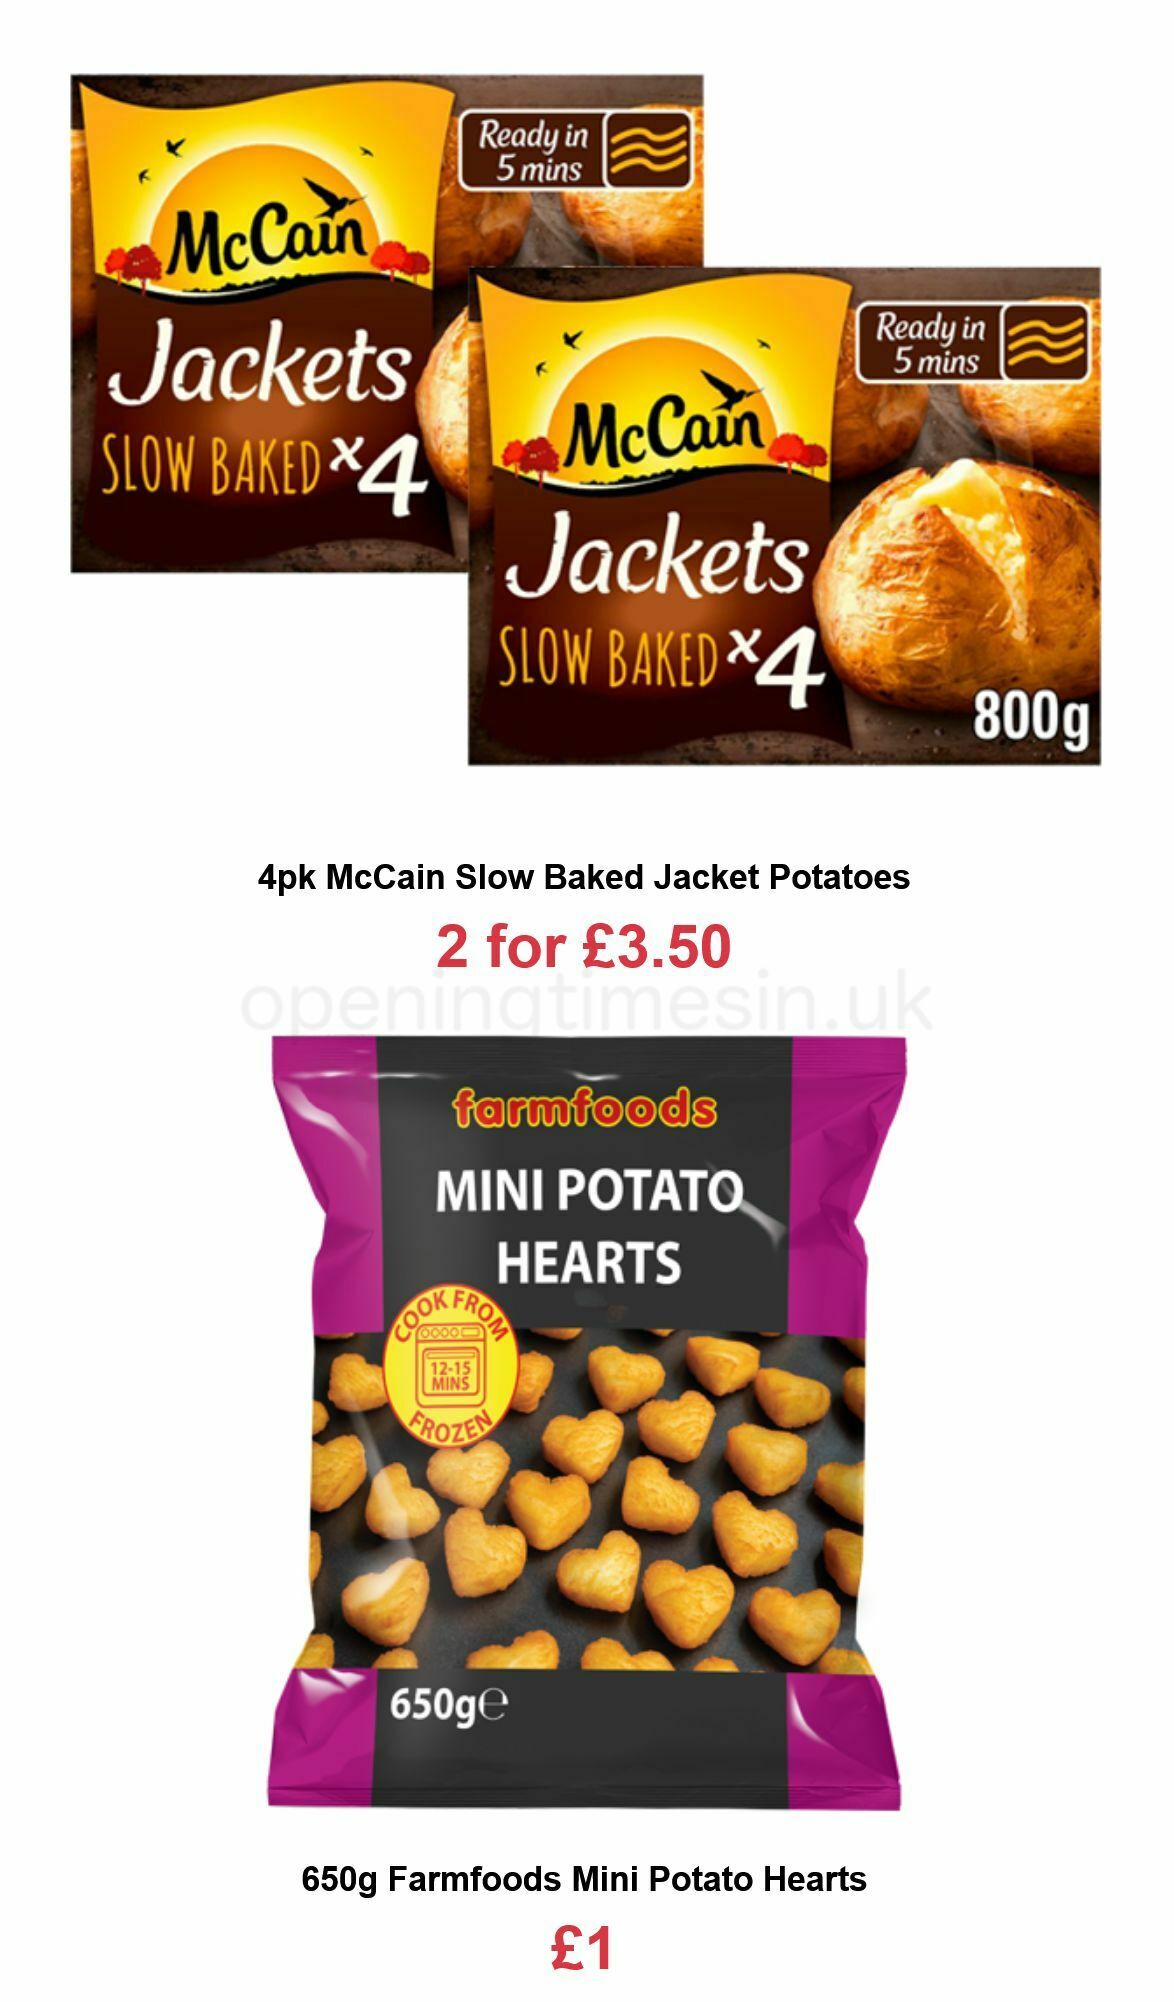 Farmfoods Offers from 11 January